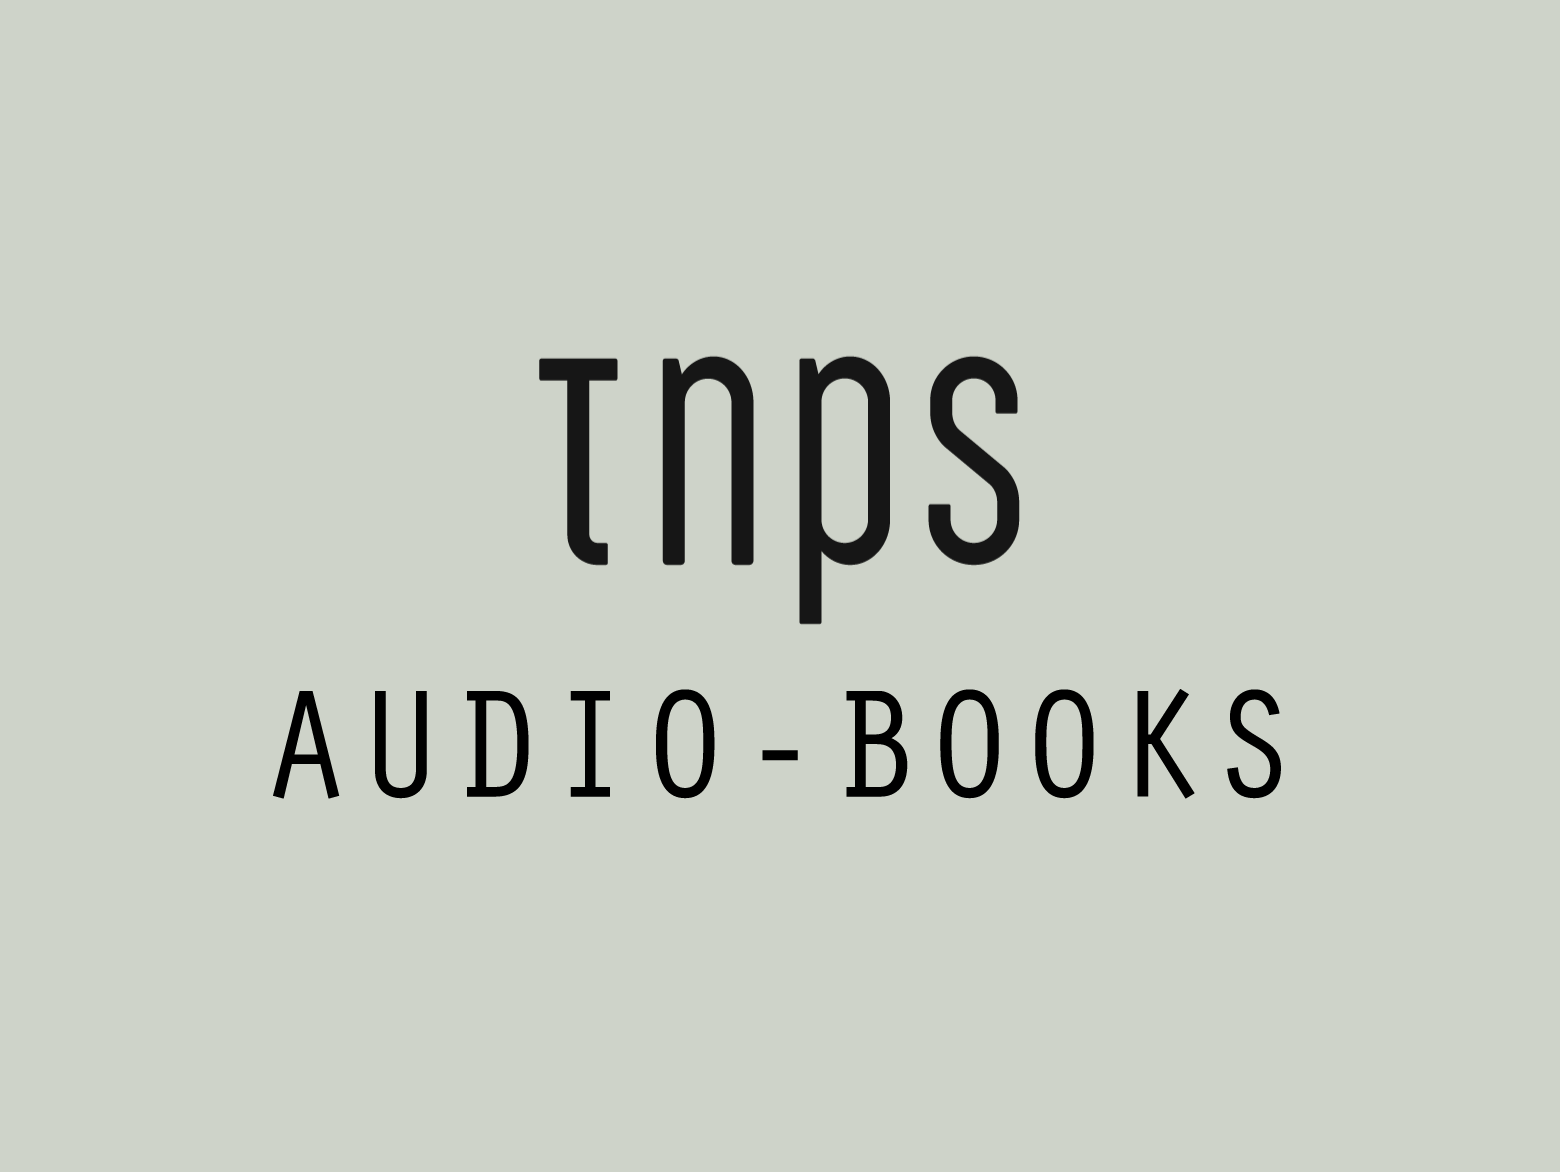 Discount ebook deals mailing list BookBub finally adds audiobooks. Launches Chirp in partnership with Findaway